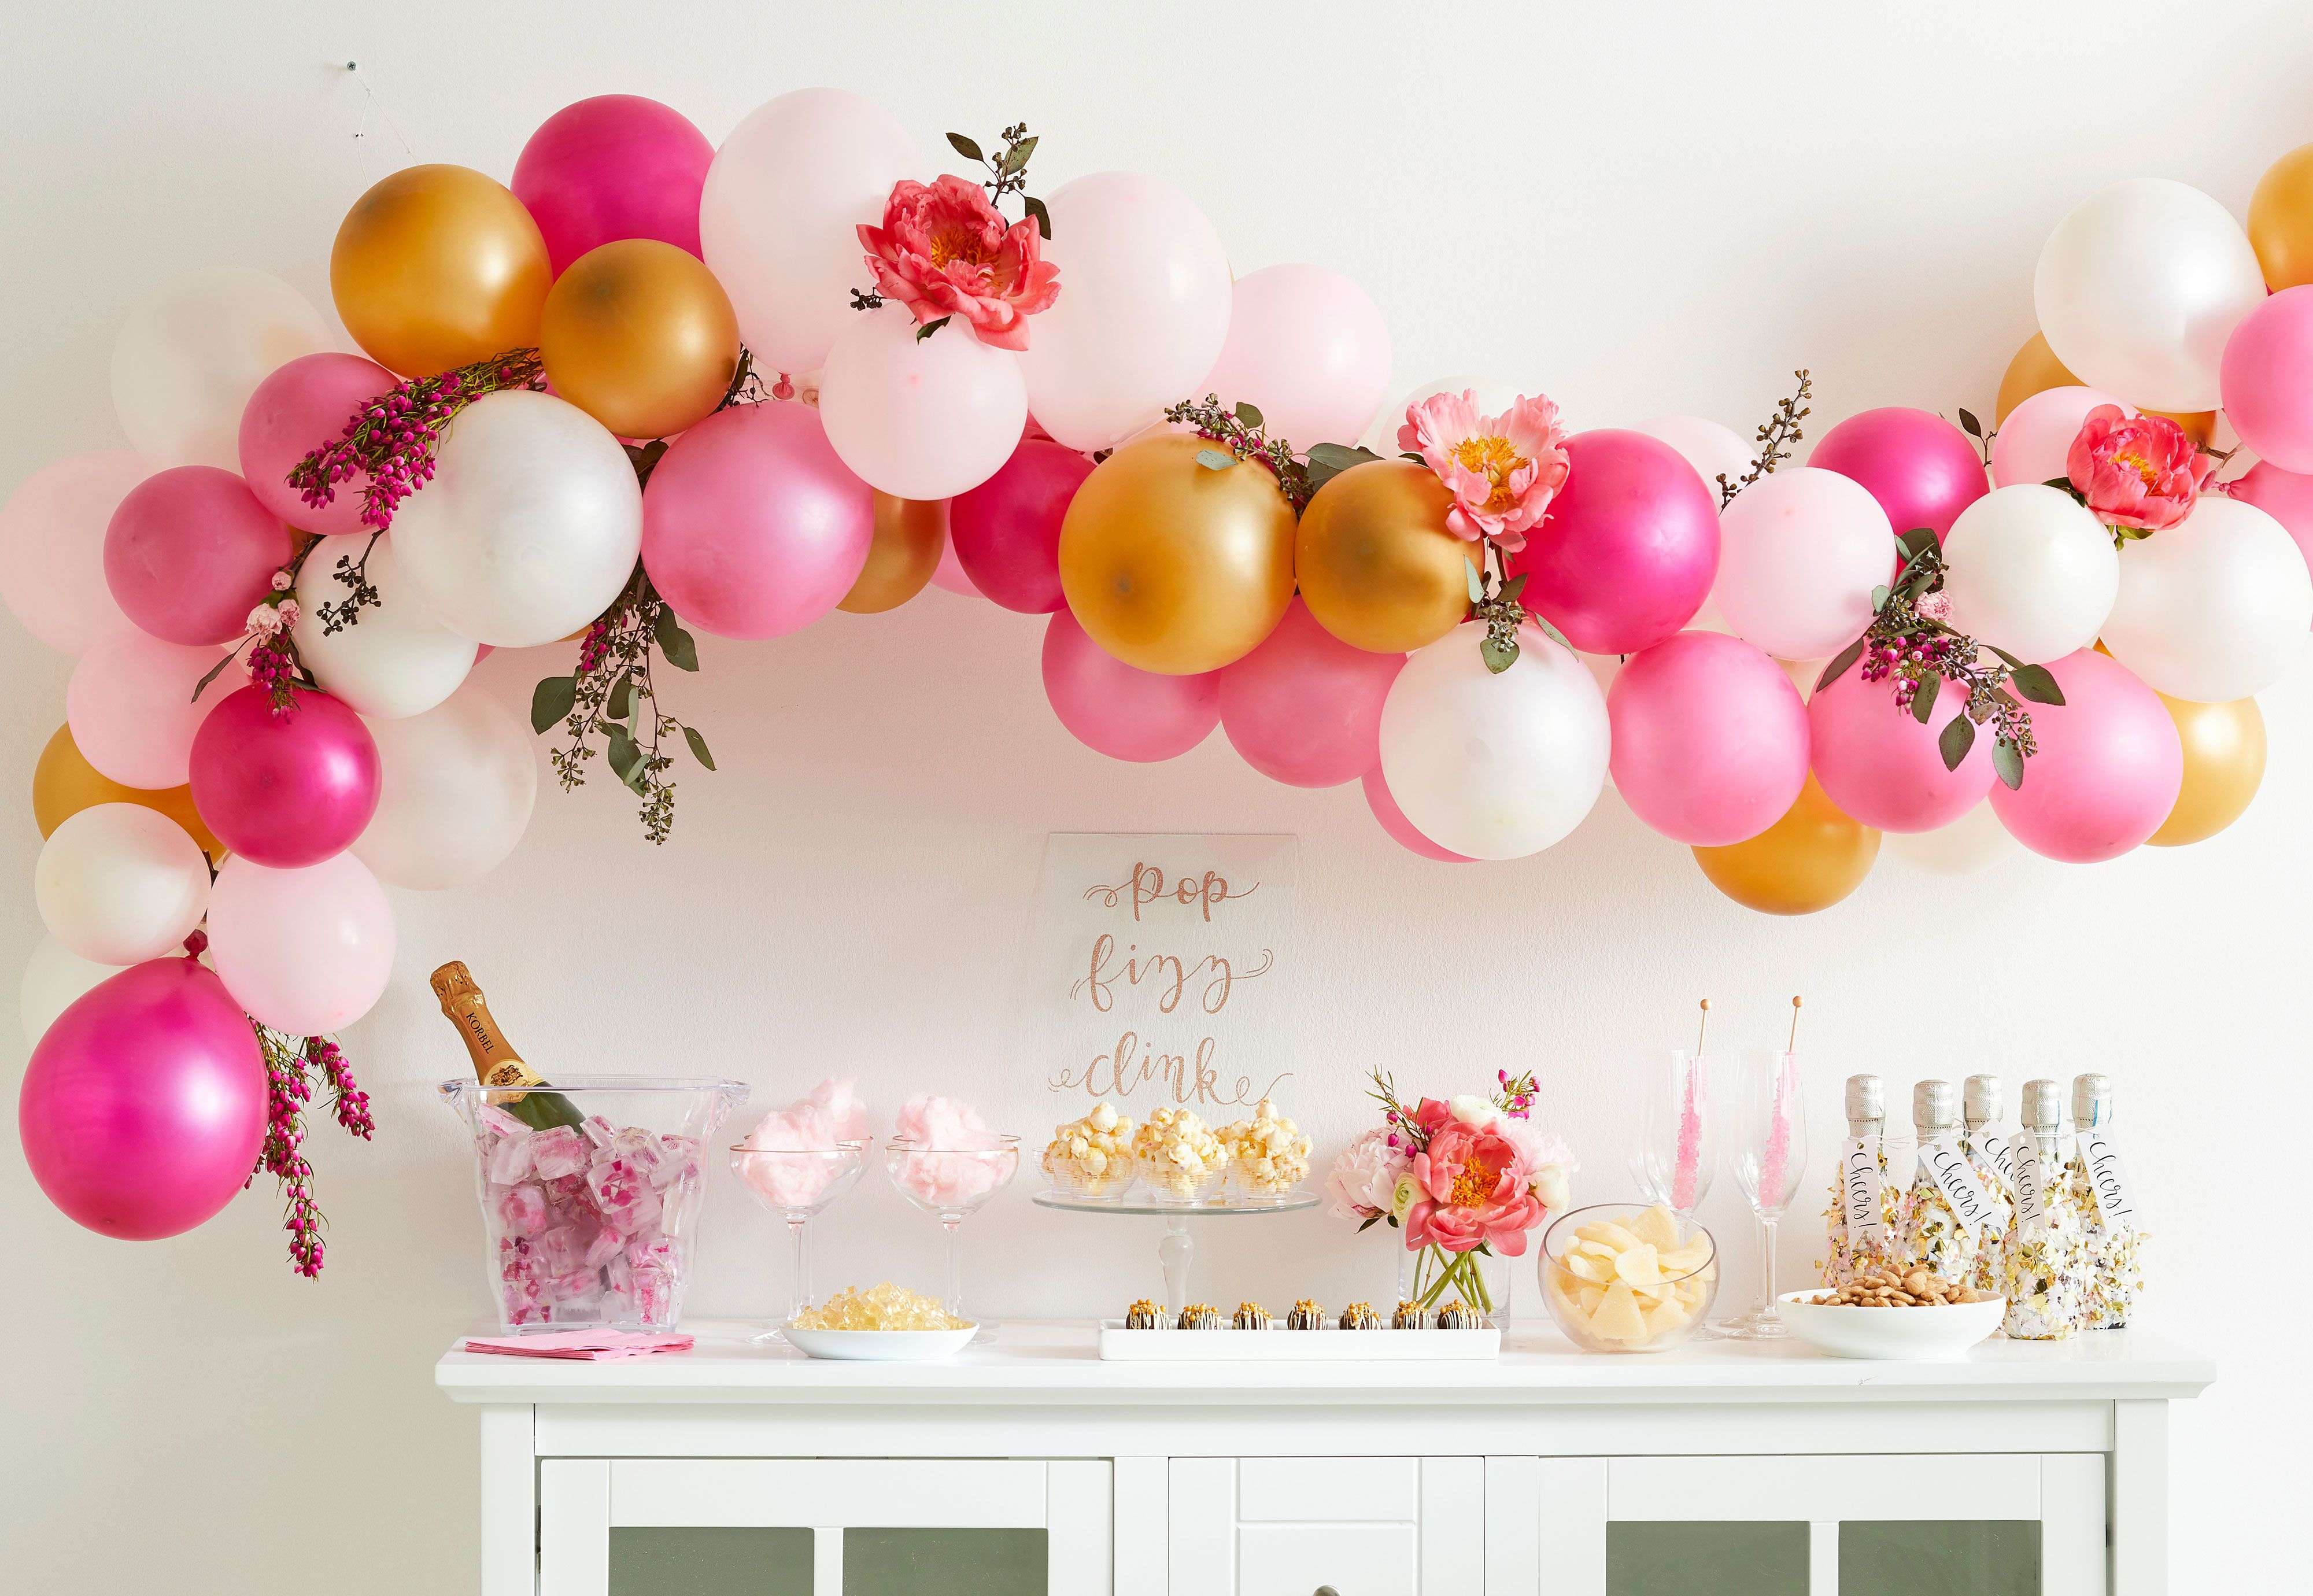 How To Hang A Balloon Arch On Wall